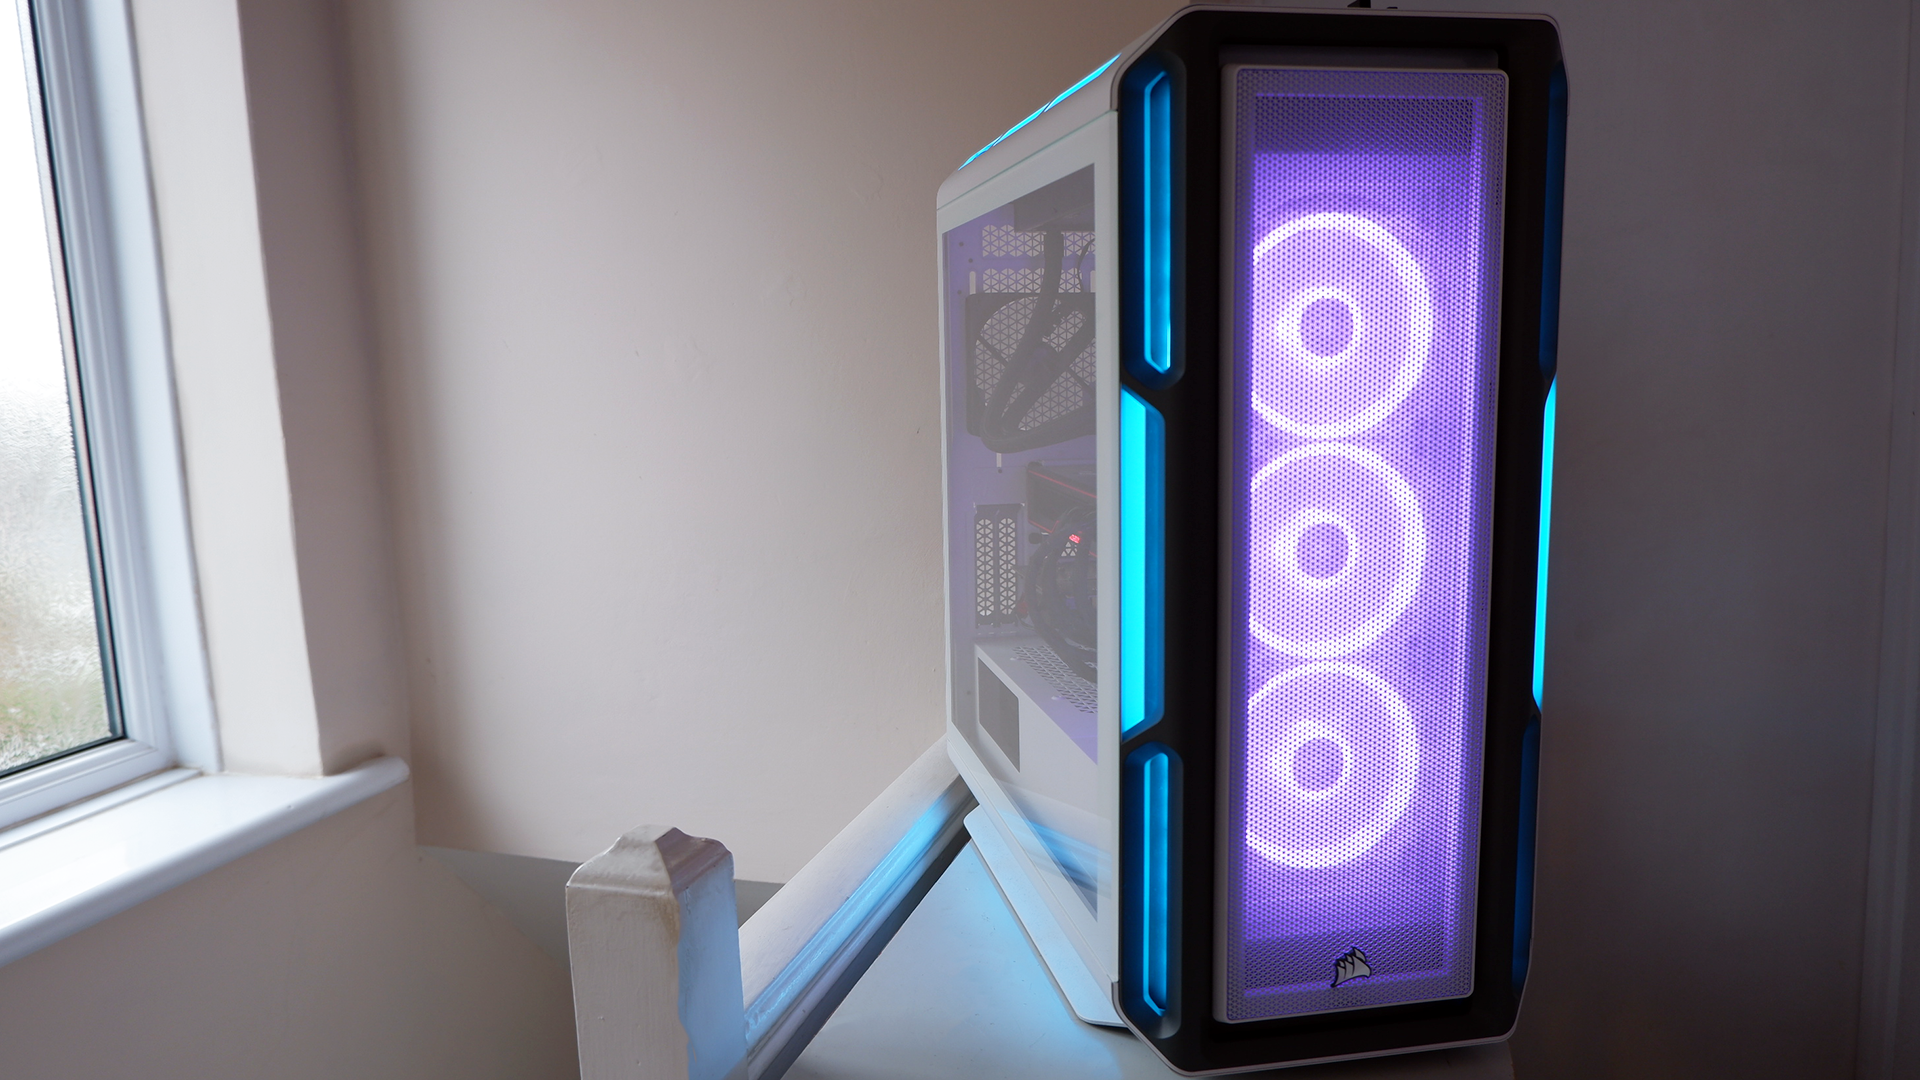 Corsair iCUE 5000T RGB mid-tower PC case with RGB lighting enabled in blue and pink